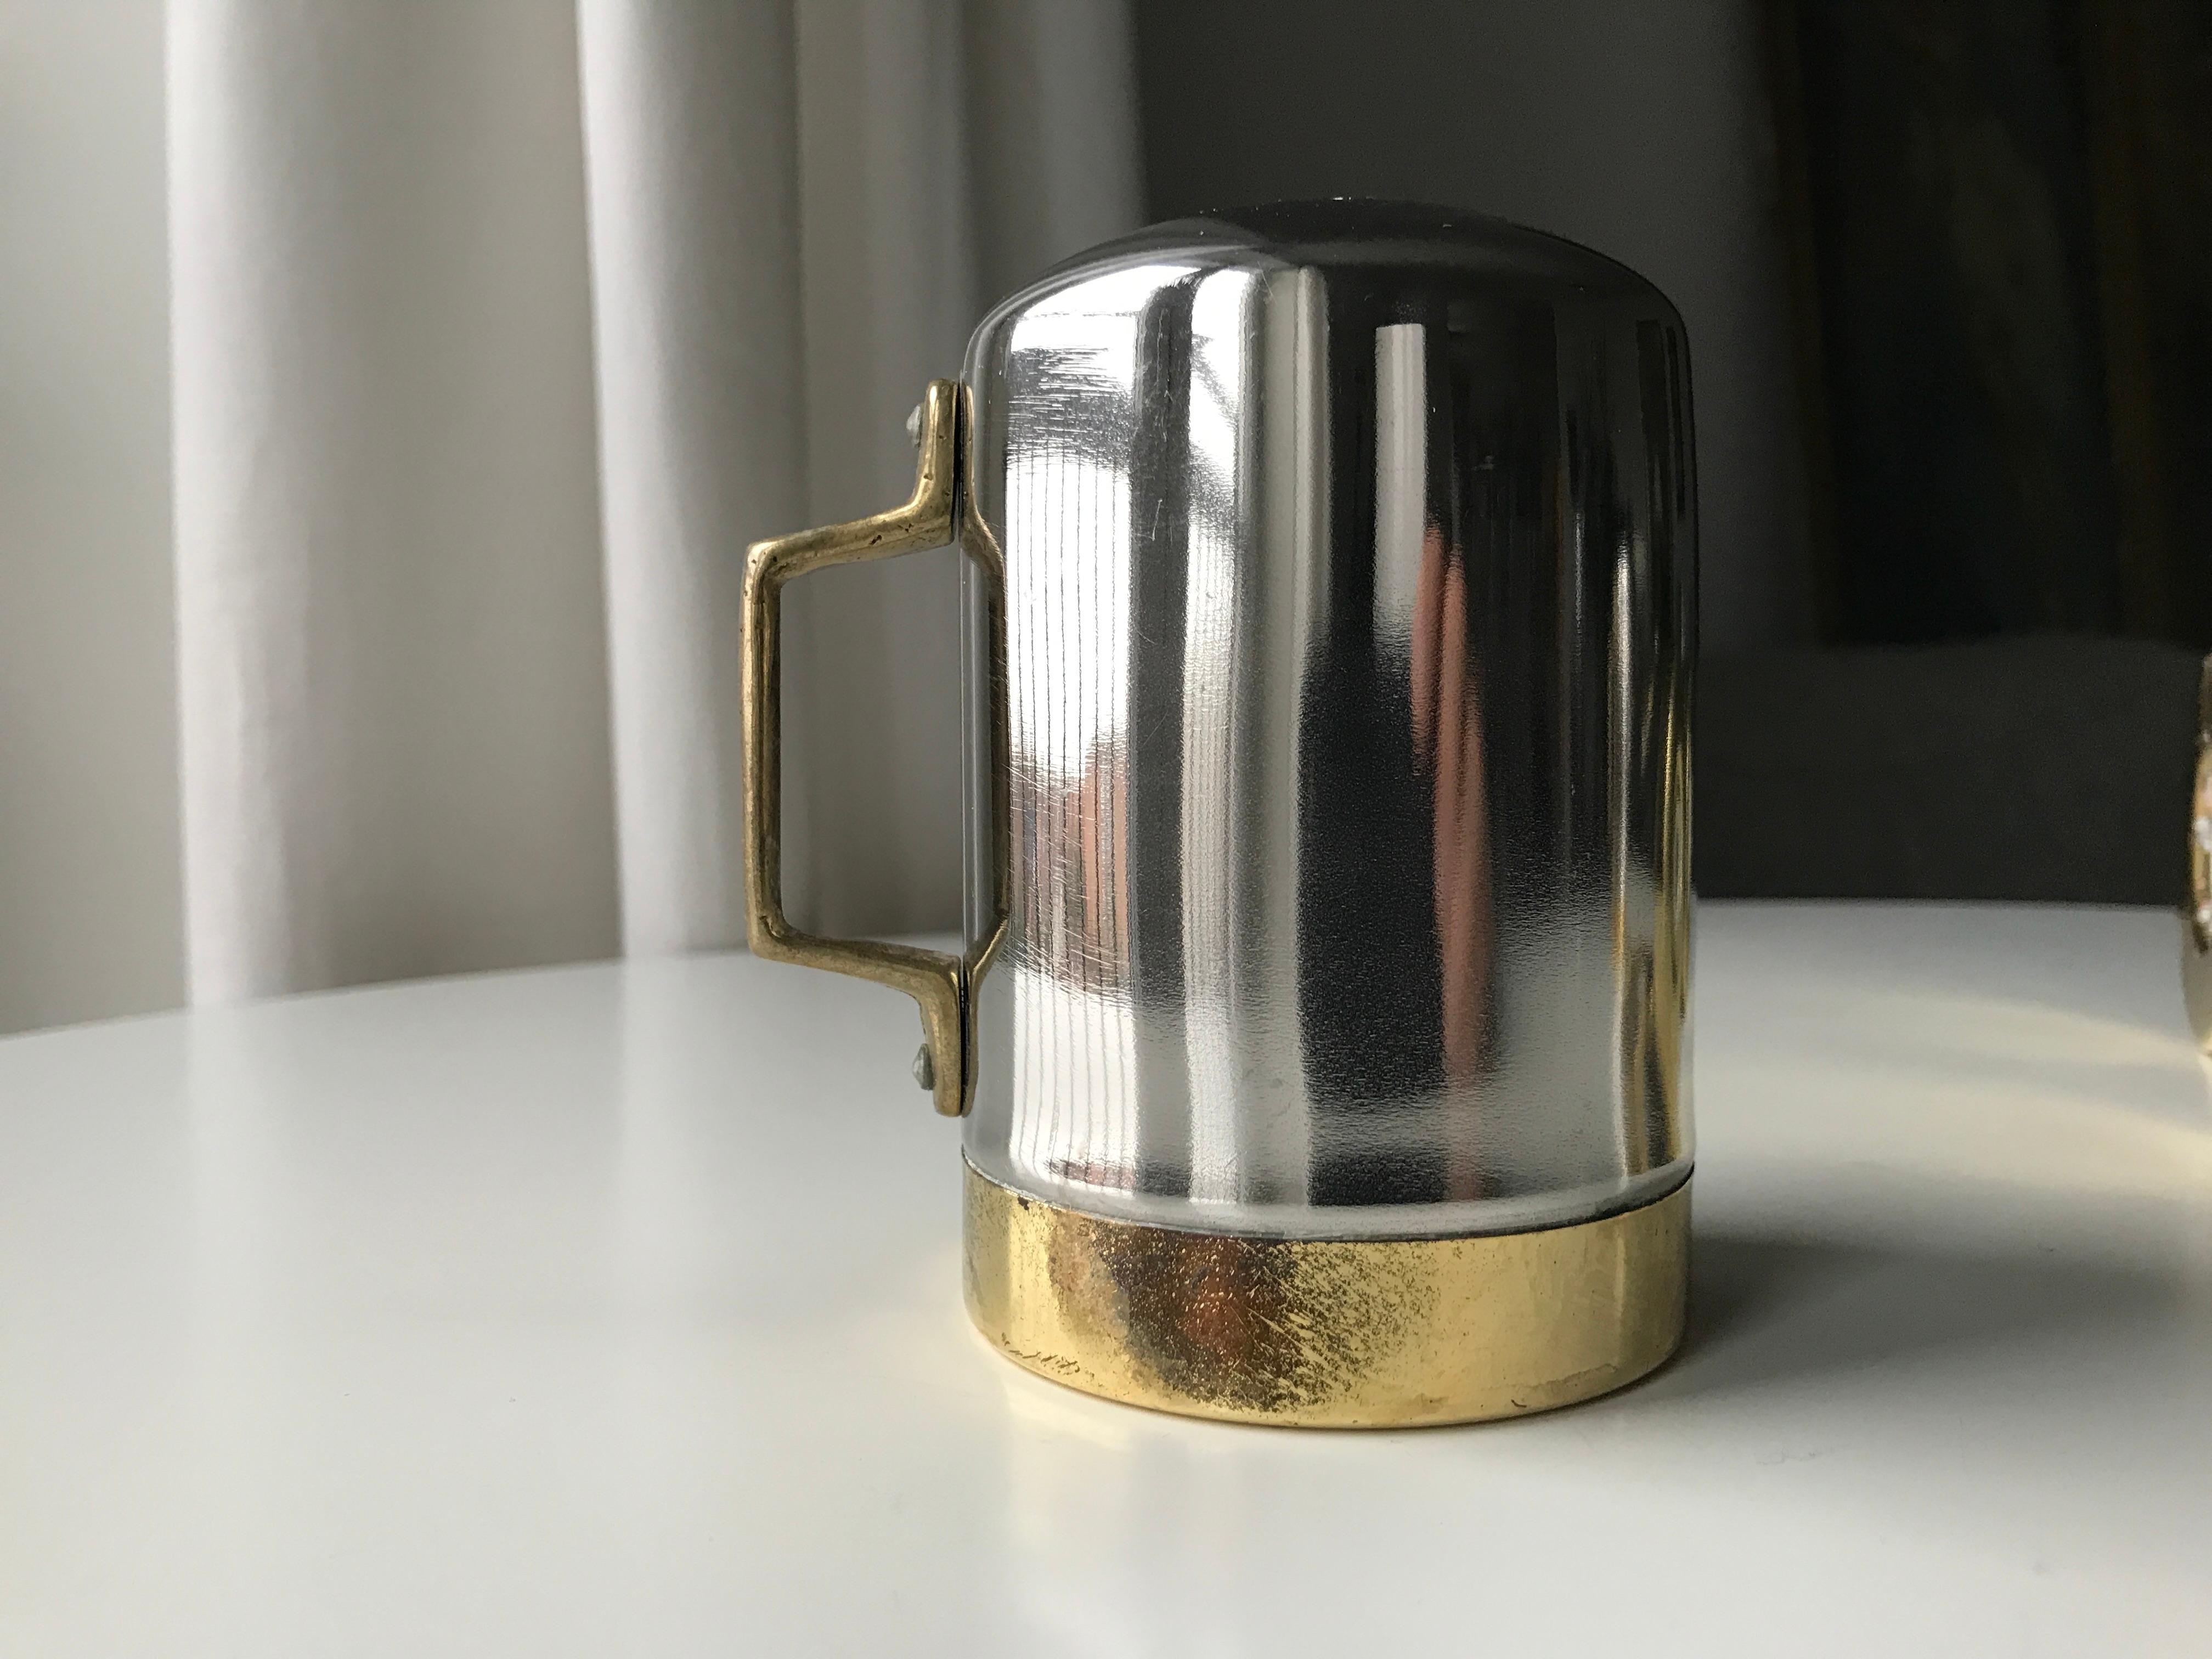 Salt and Pepper Space Age Vintage Diner Set, 1960s Chrome and Brass For Sale 8